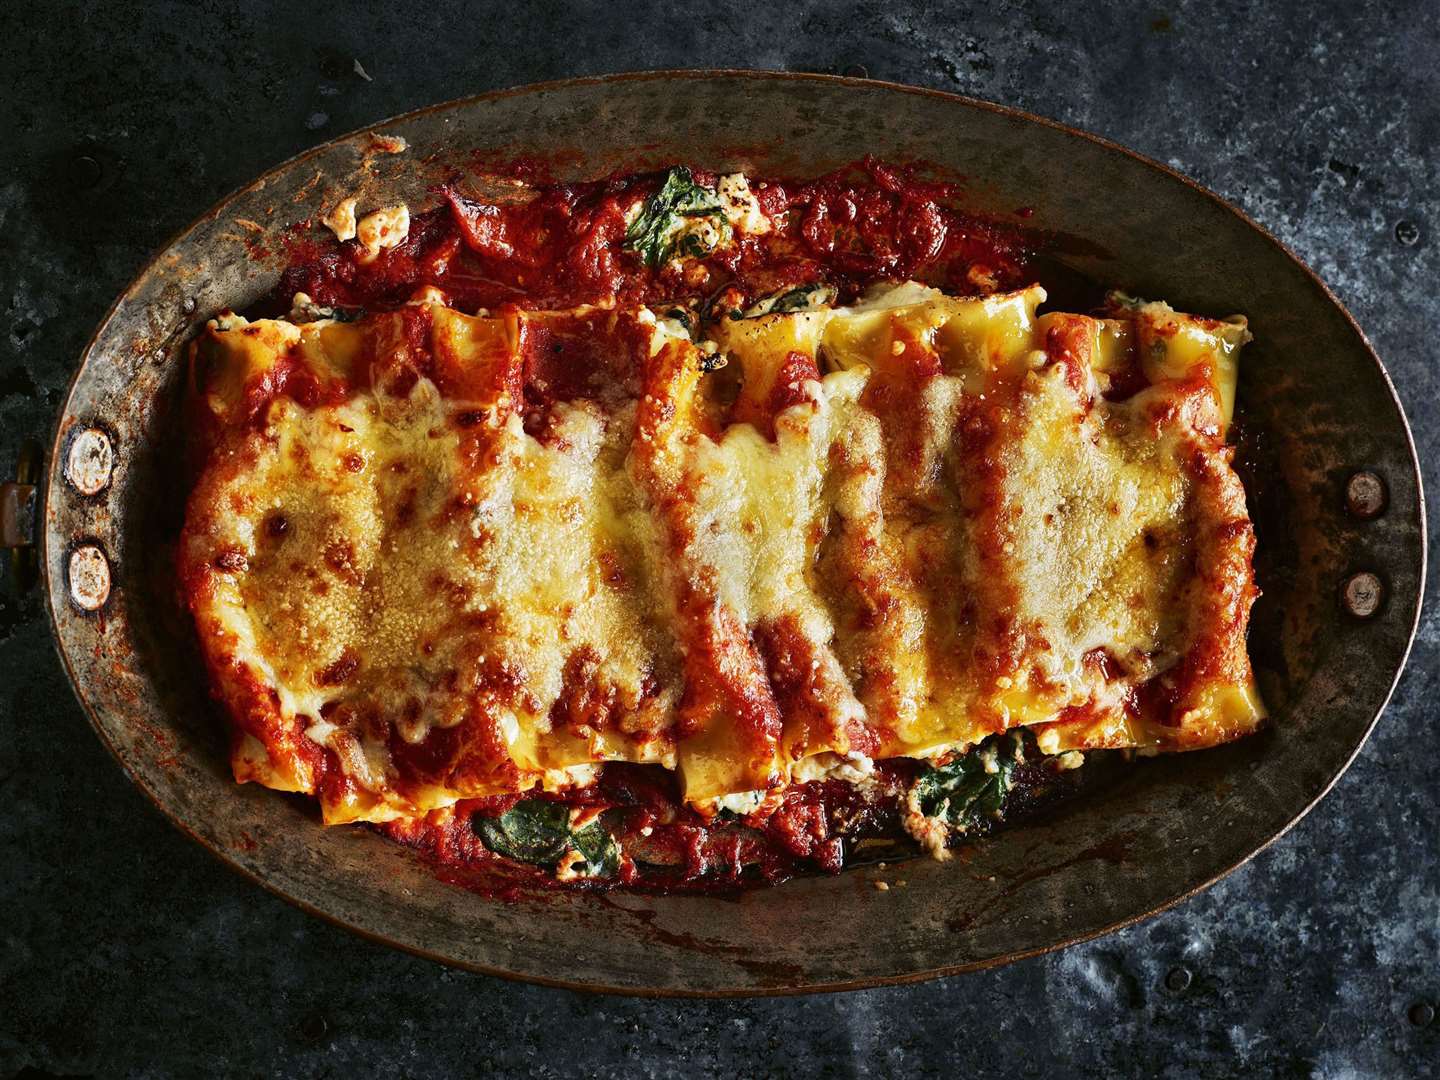 Gregg's spinach and ricotta cannelloni. Picture: James Murphy/PA